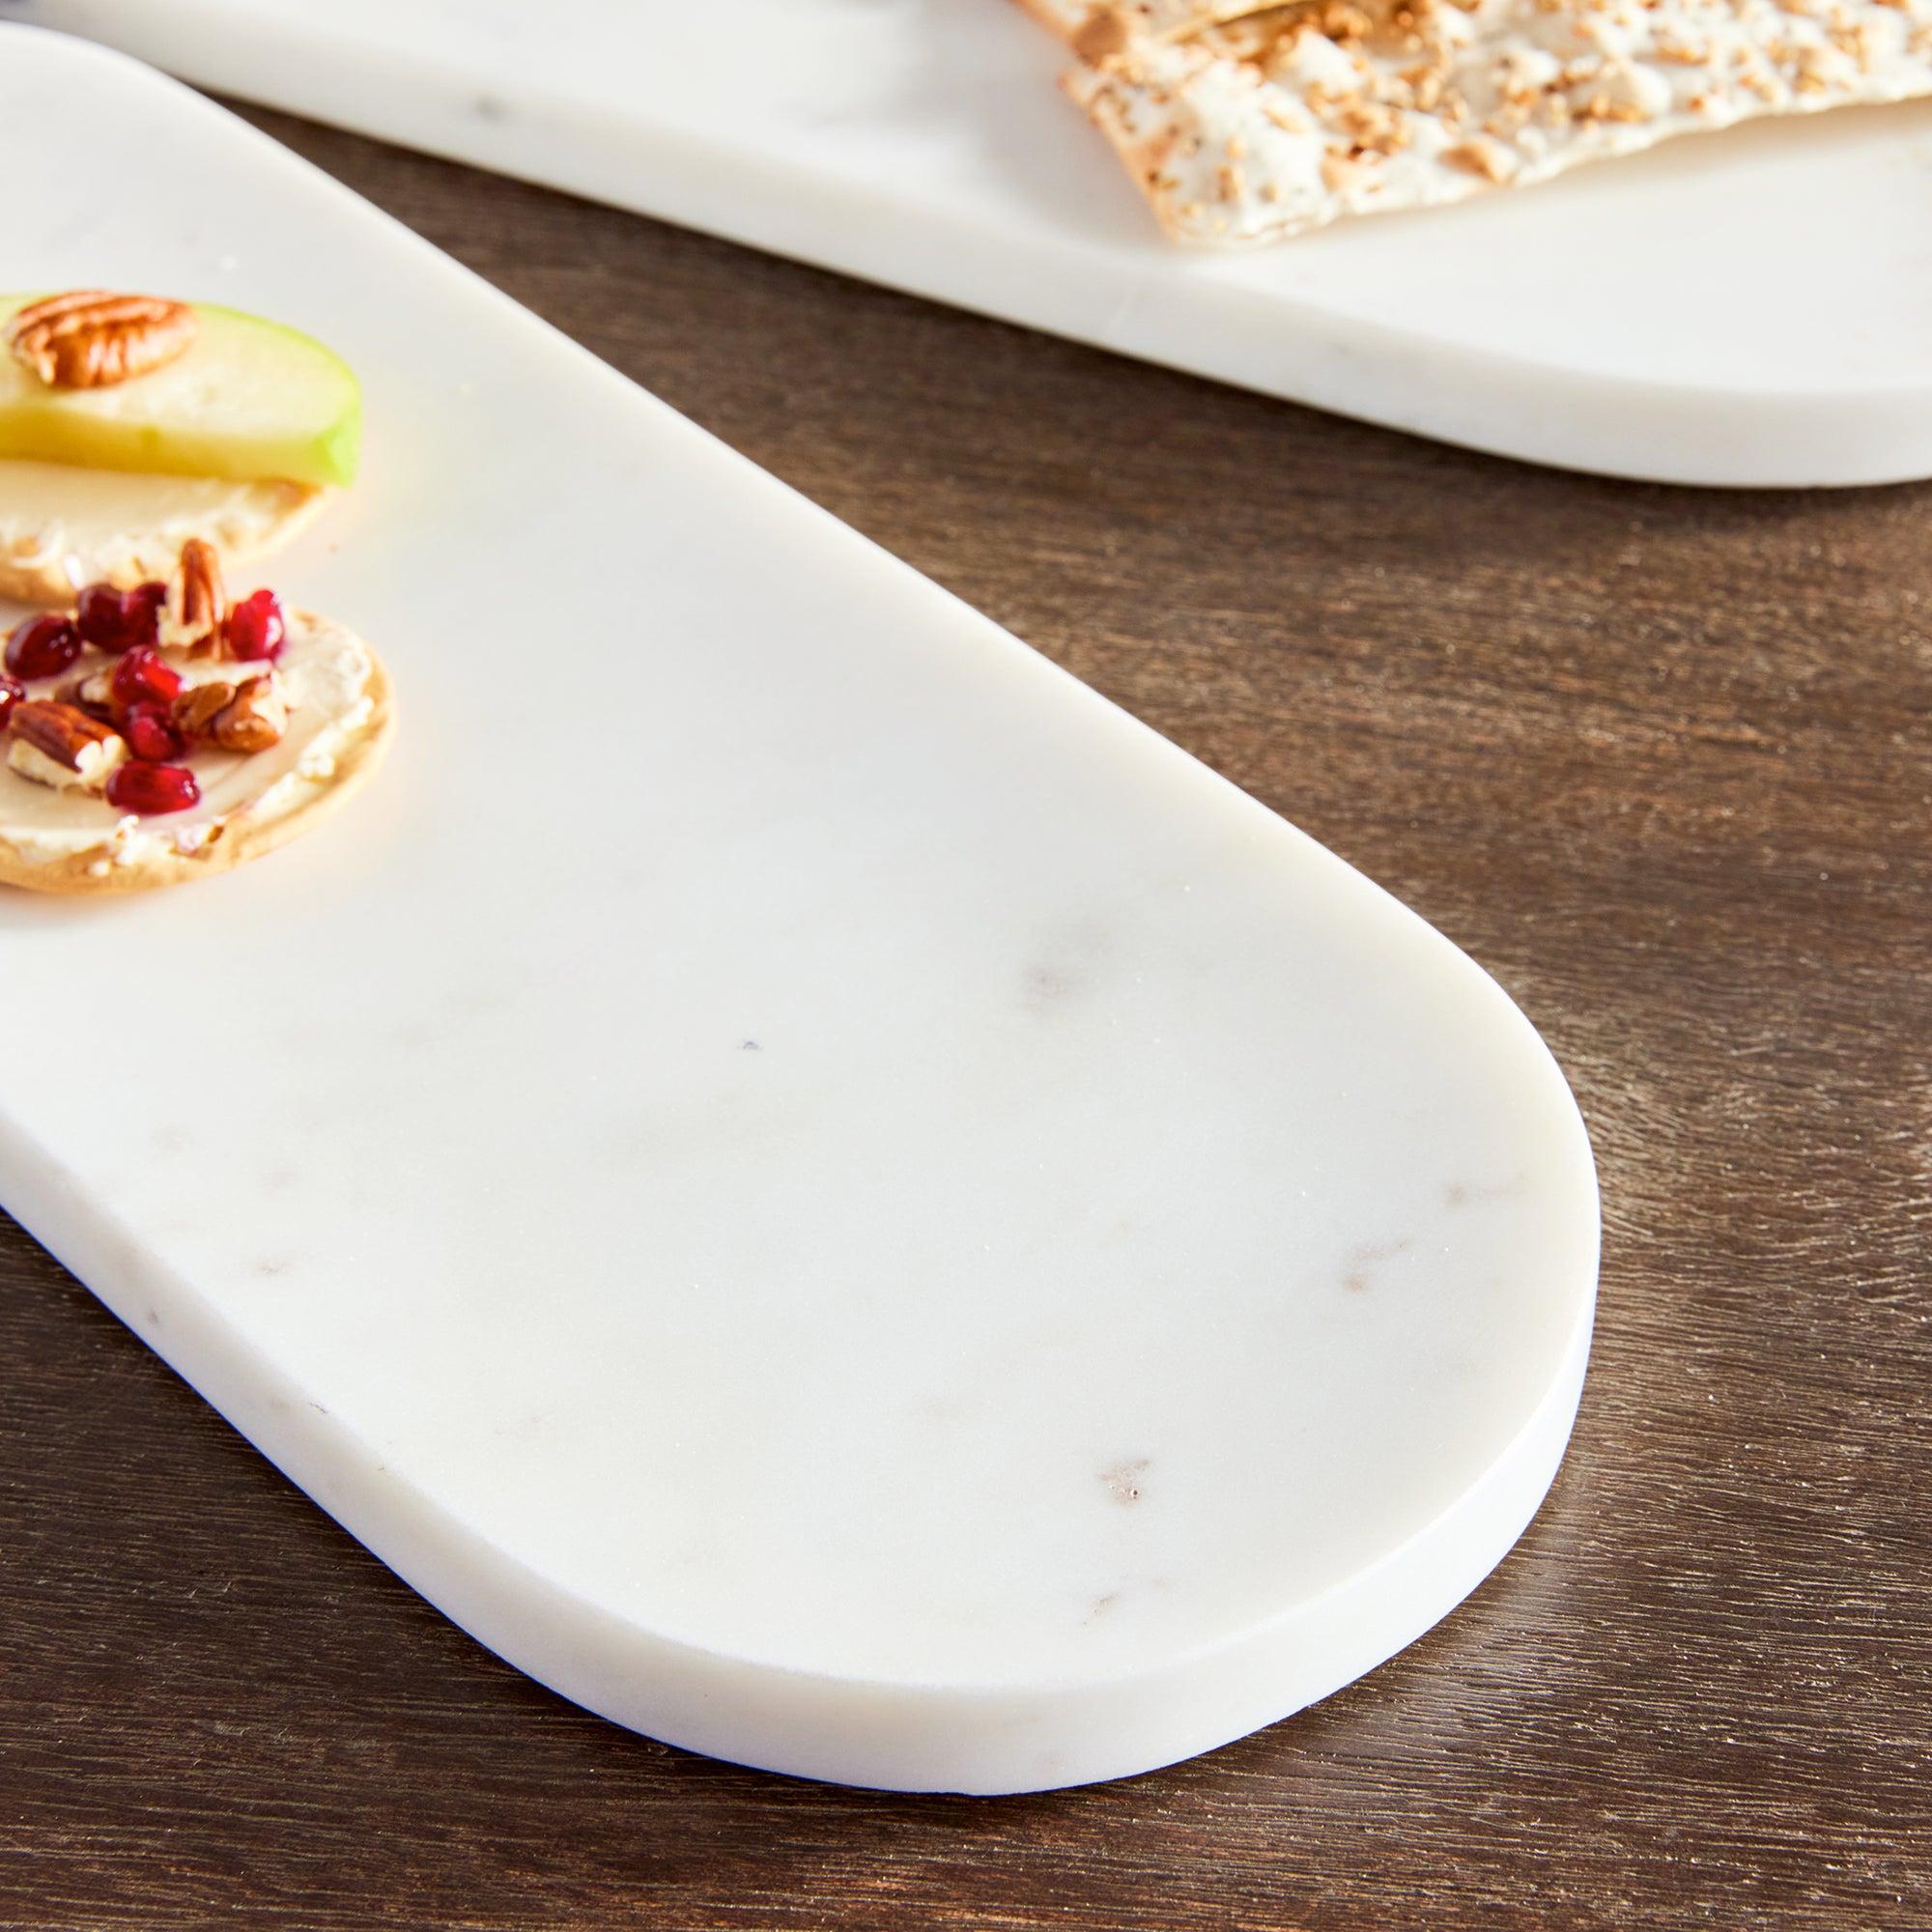 Sleek and simple, this set of oval marble trays are a great addition to any kitchen. An elegant way to serve guests an array of cheese, crackers & fruit. Amethyst Home provides interior design, new construction, custom furniture, and area rugs in the San Diego metro area.